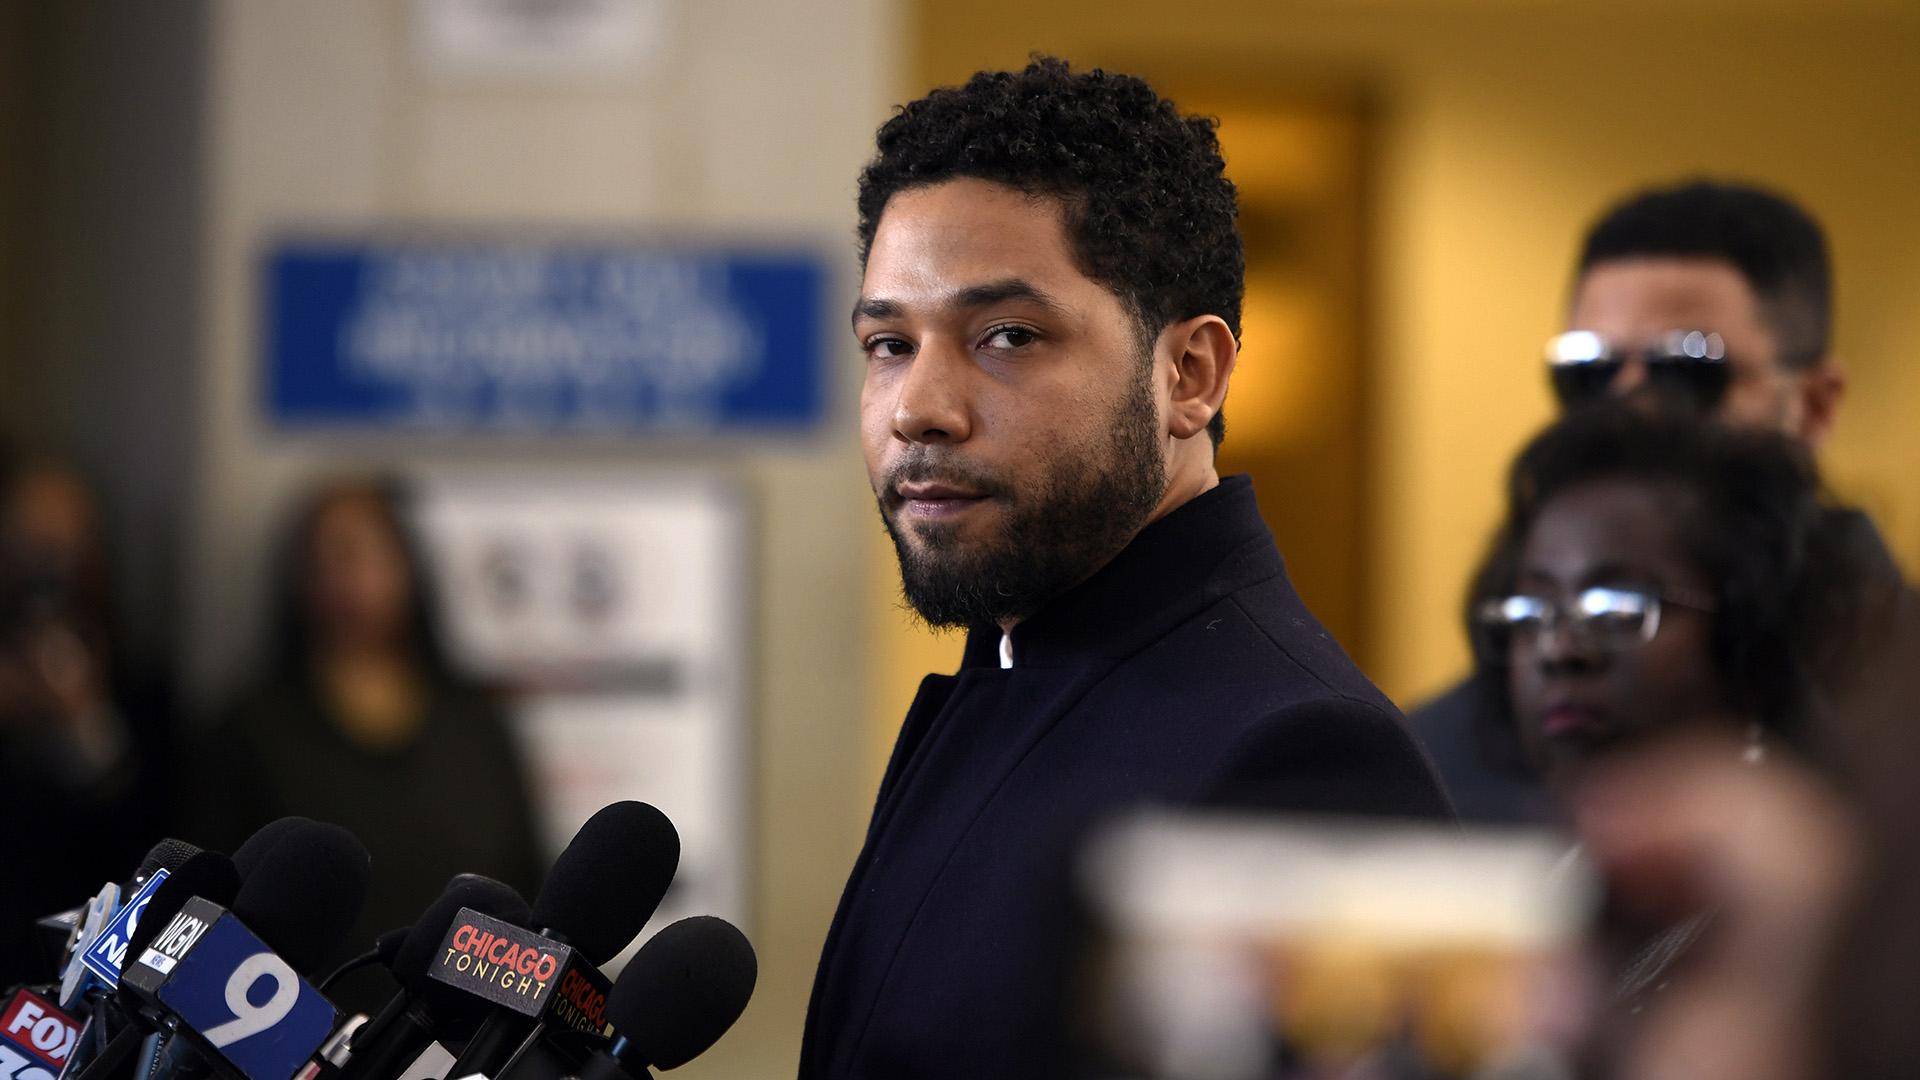 Actor Jussie Smollett talks to the media before leaving Cook County Court after his charges were dropped, Tuesday, March 26, 2019. (AP Photo / Paul Beaty)